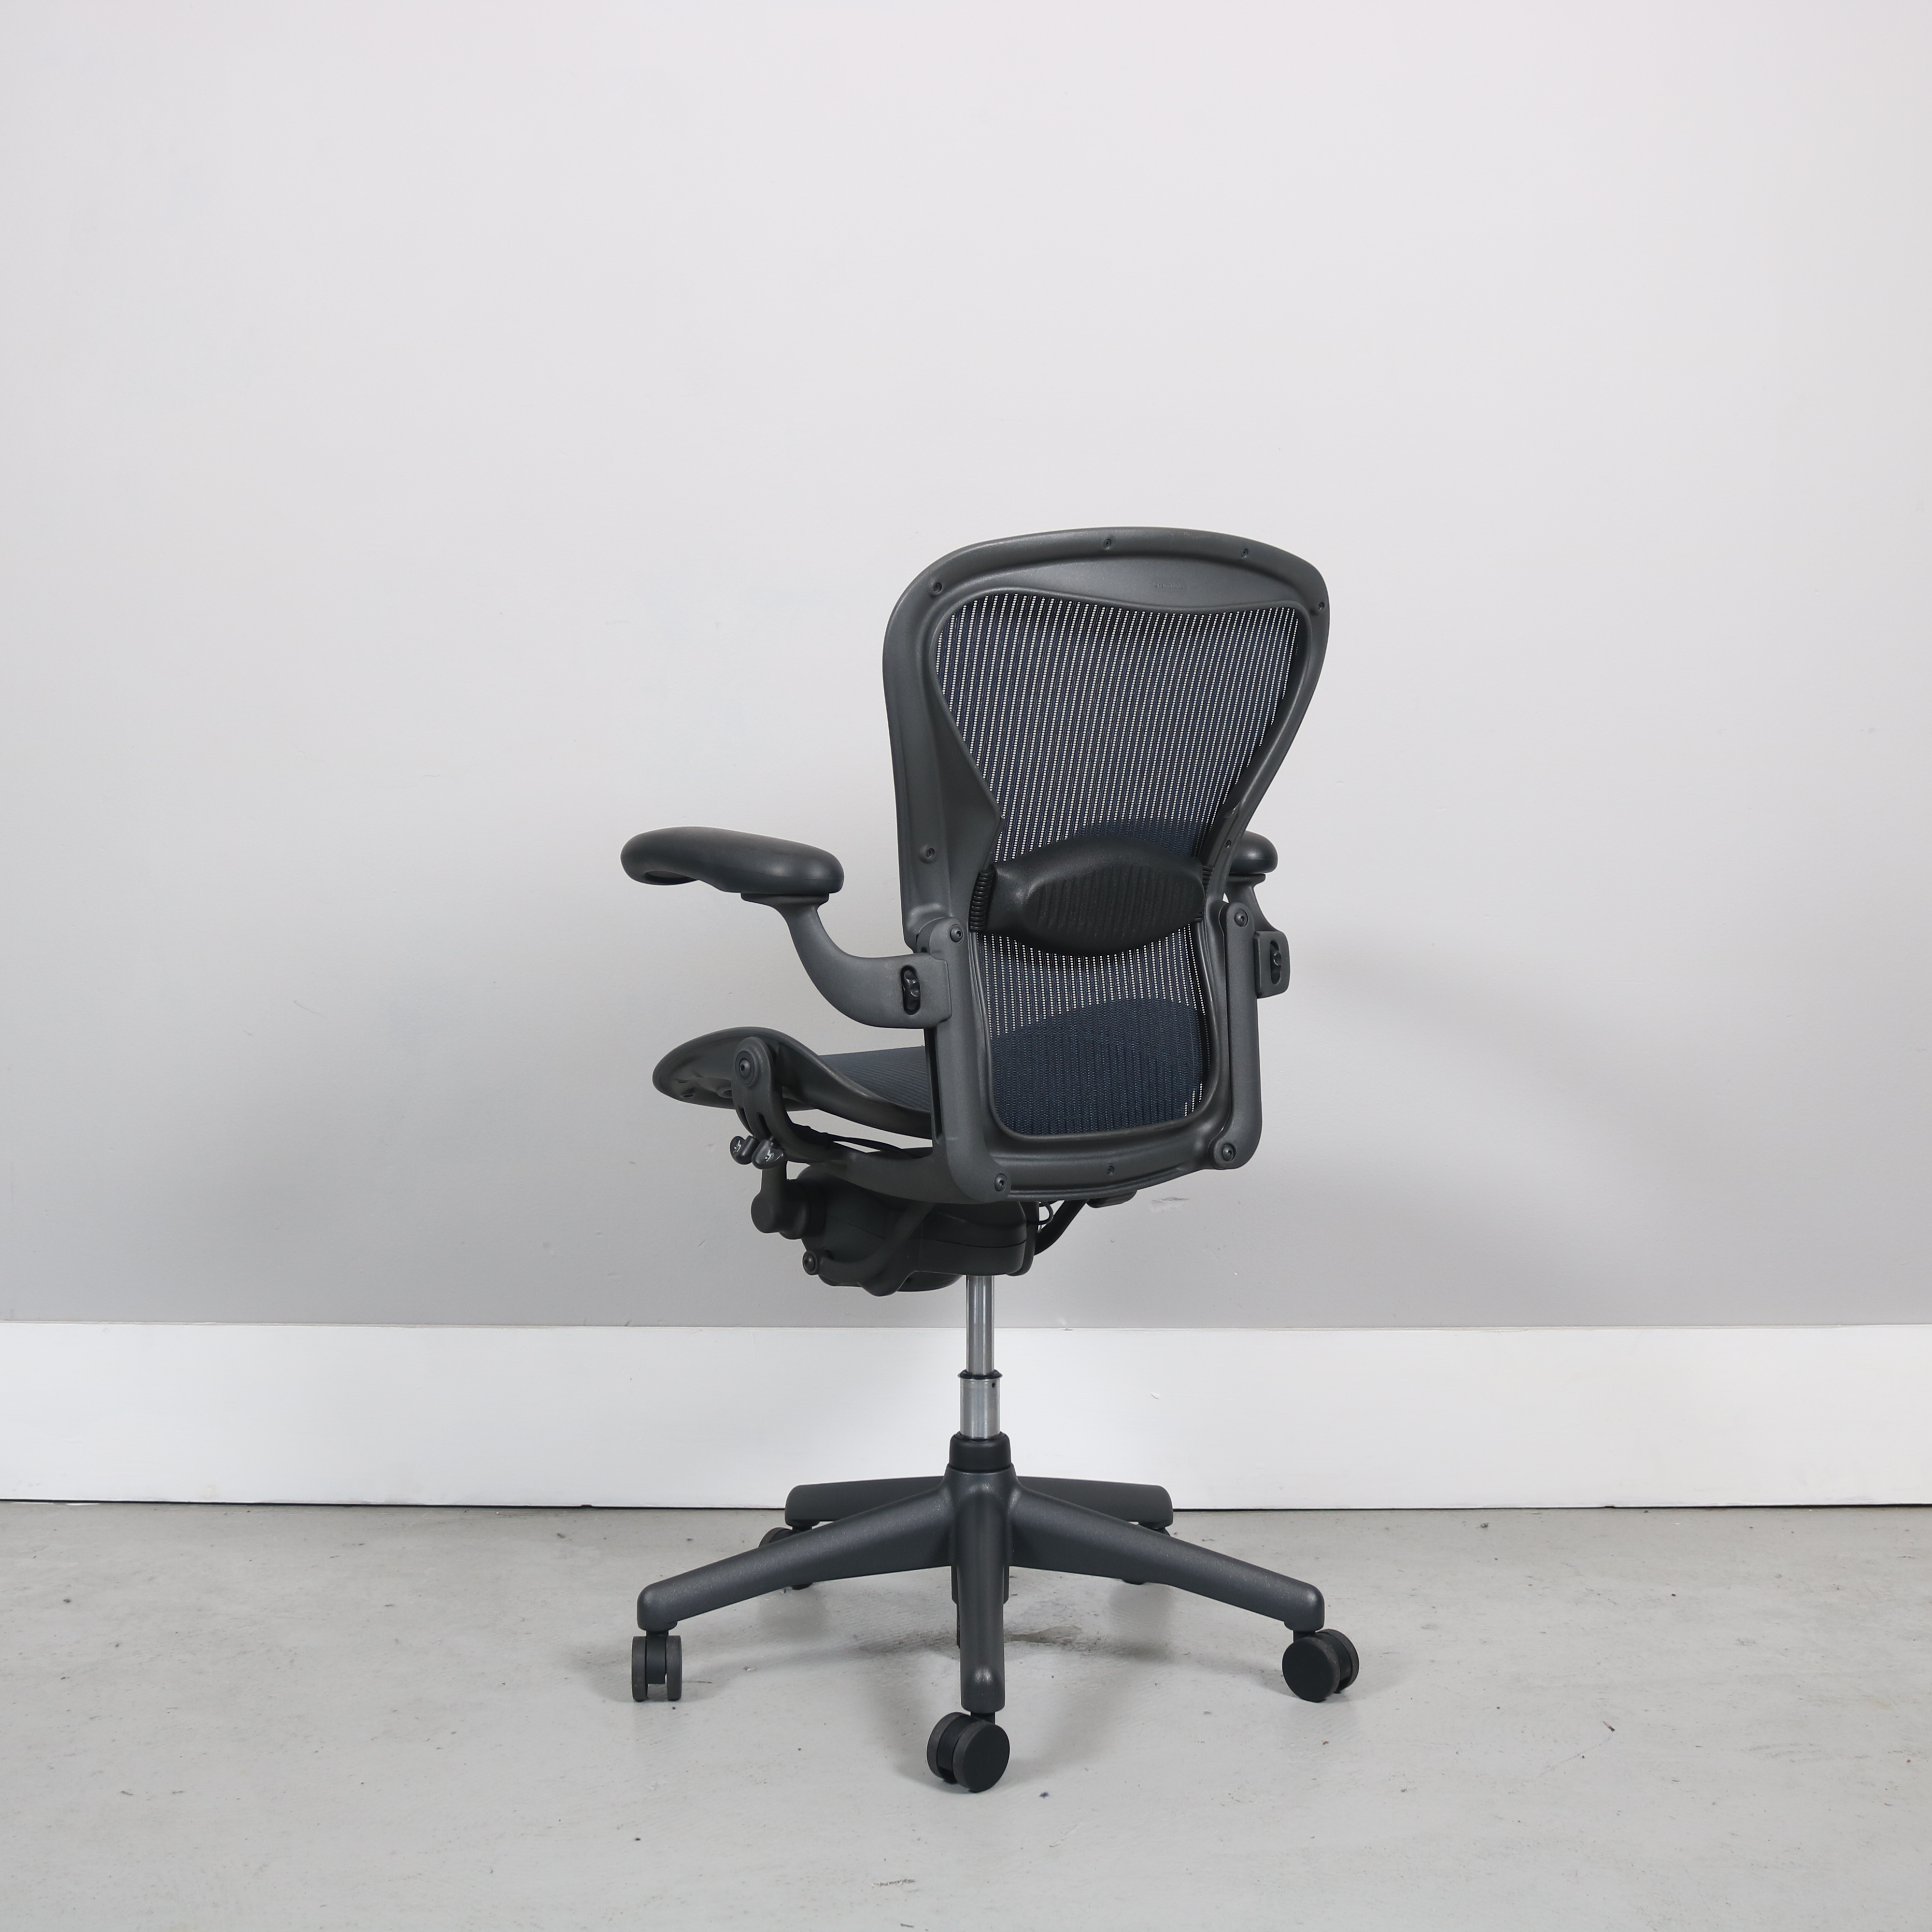 Herman Miller standard Blue Aeron chair delivery with M25 StudioModern